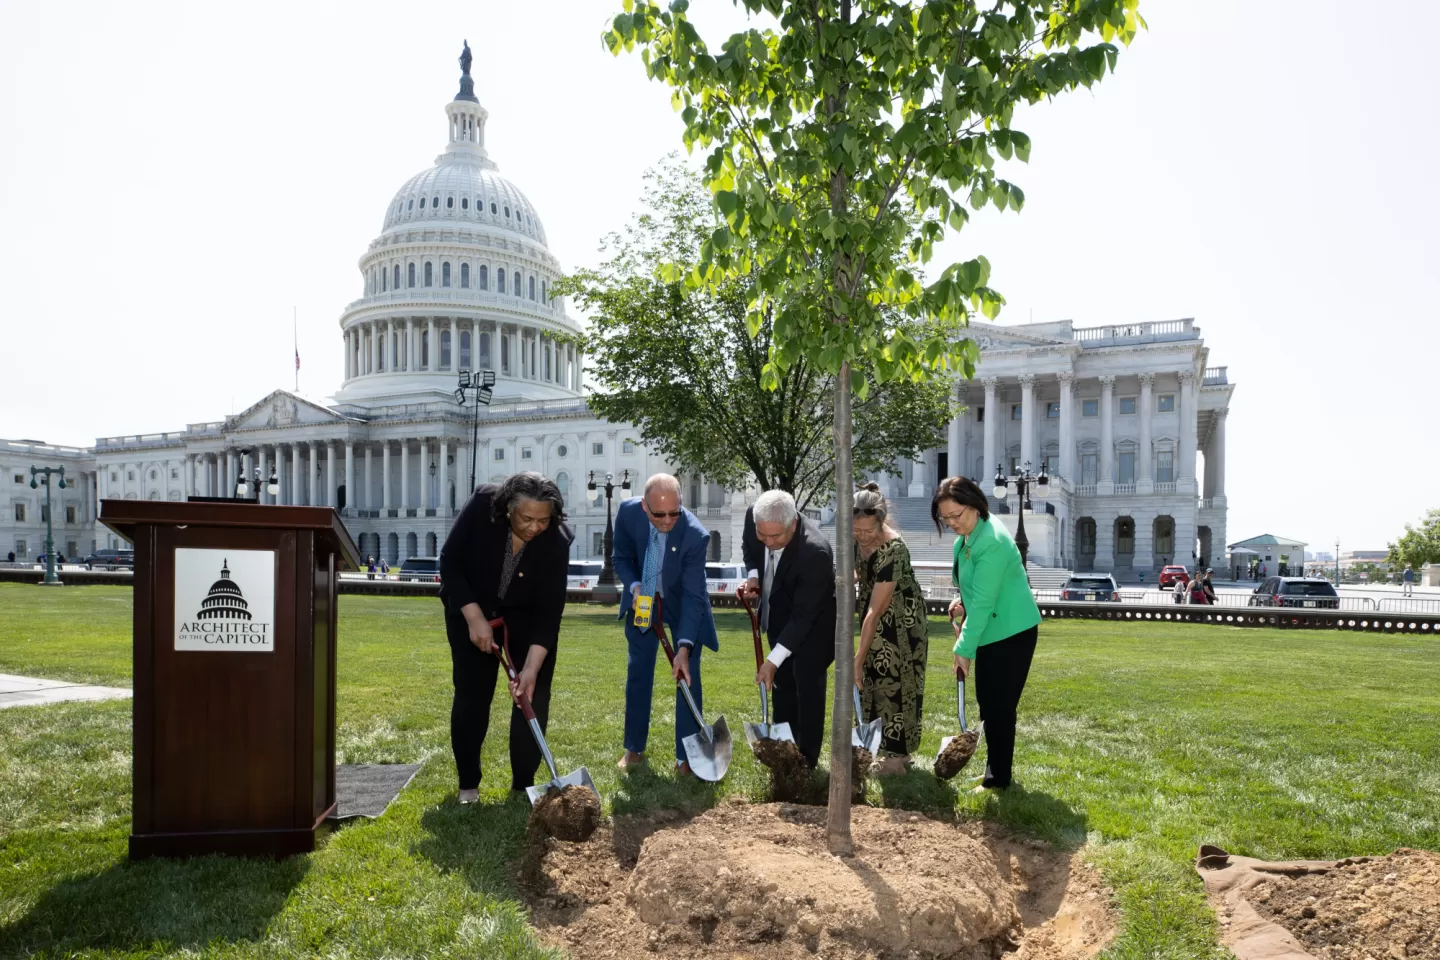 People holding shovels around a tree.